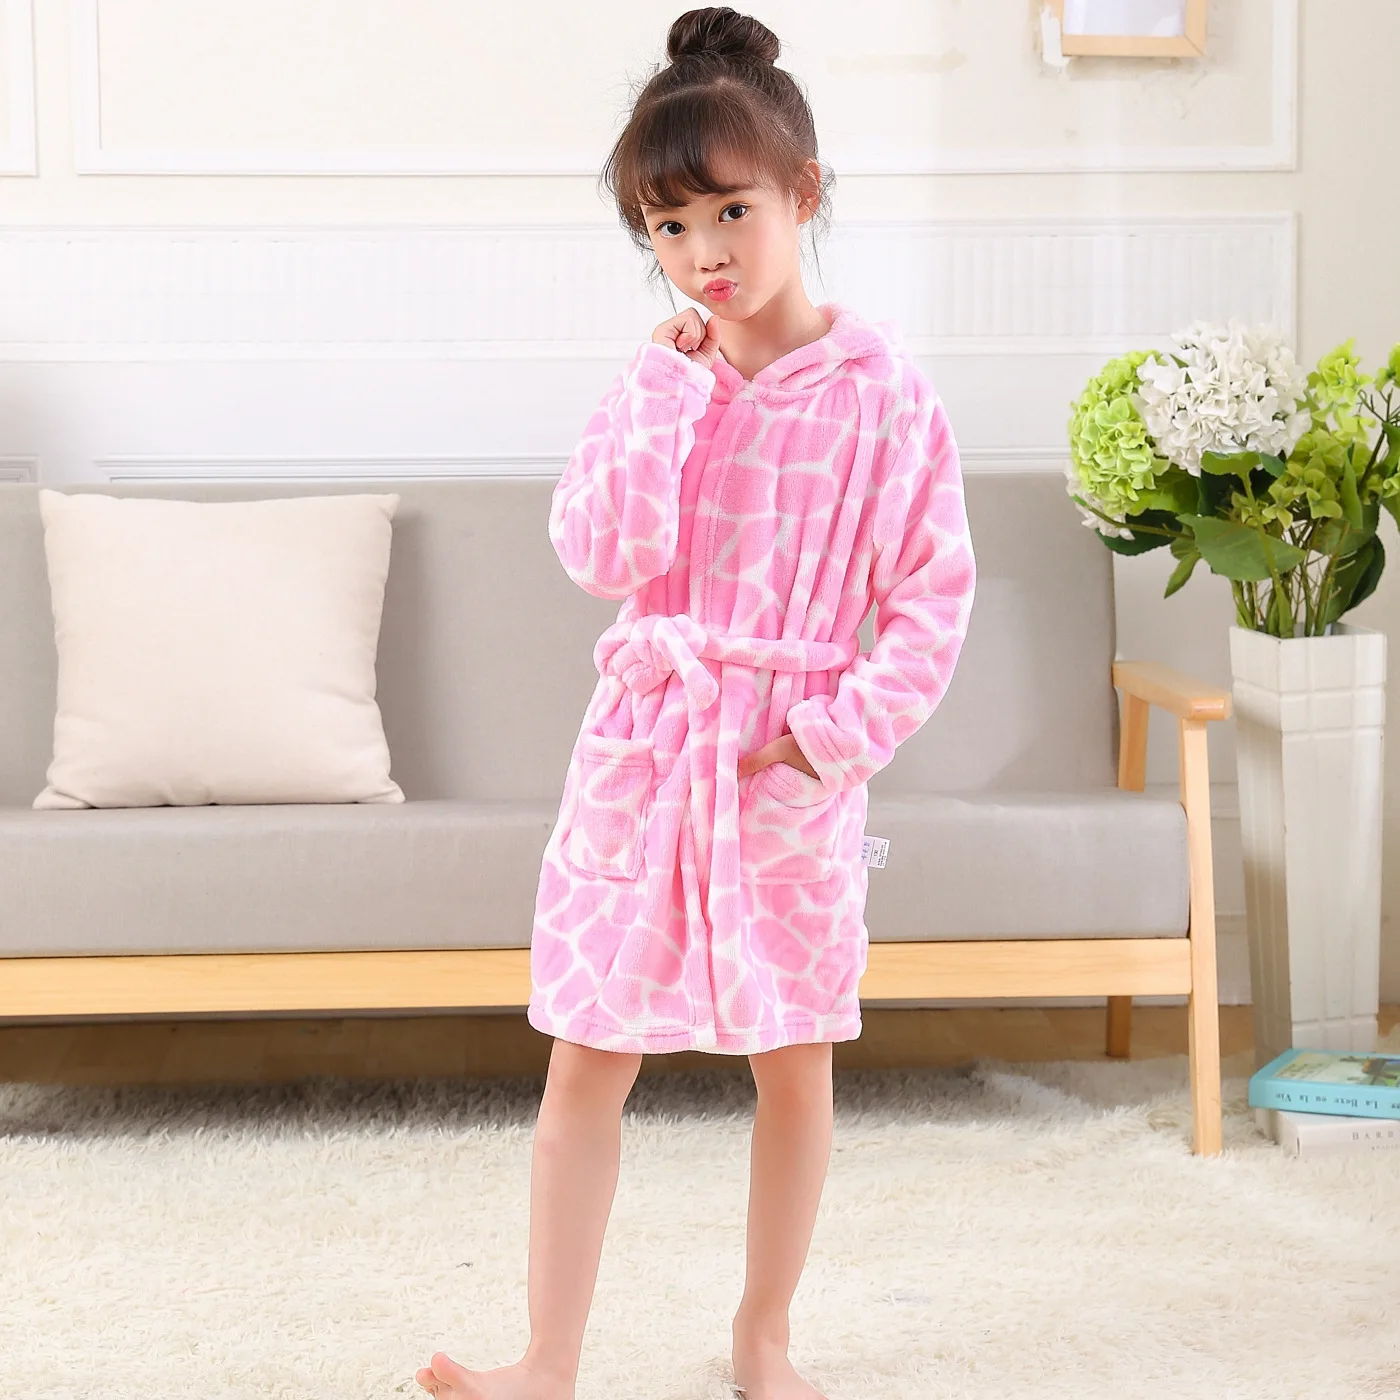 Baby hodded towel 78x78 cm Clothing Unisex Kids Clothing Pyjamas & Robes Robes Made of %100 cotton Baby bahtrobe 3 Age 2 pieces gift set 